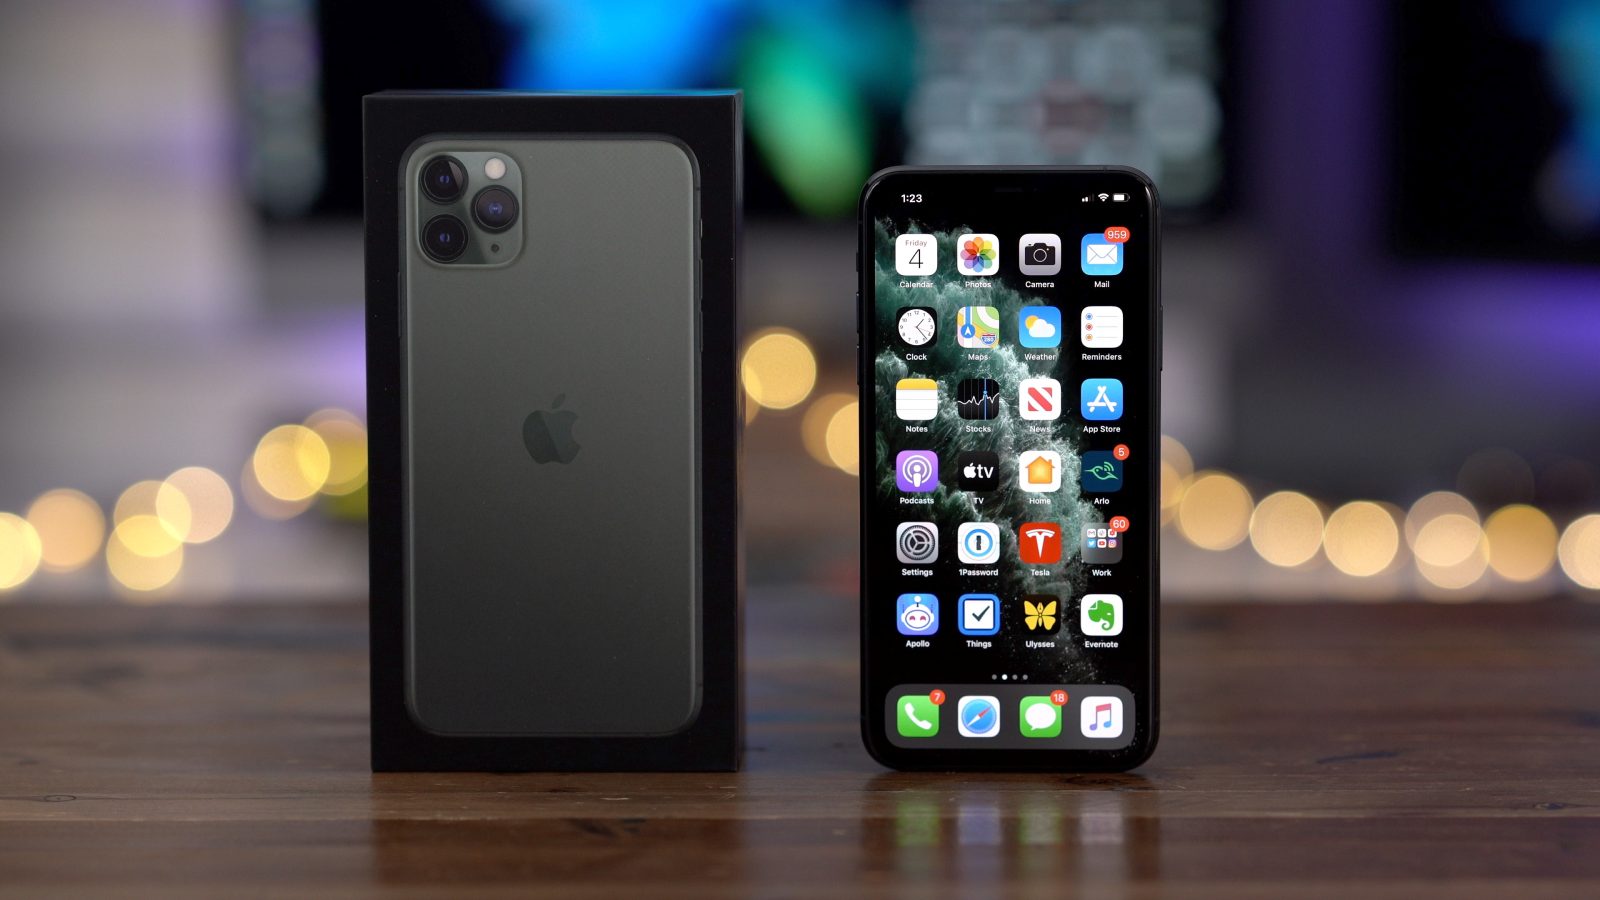 9to5Rewards: Enter to win iPhone 11 Pro Max from totallee ...